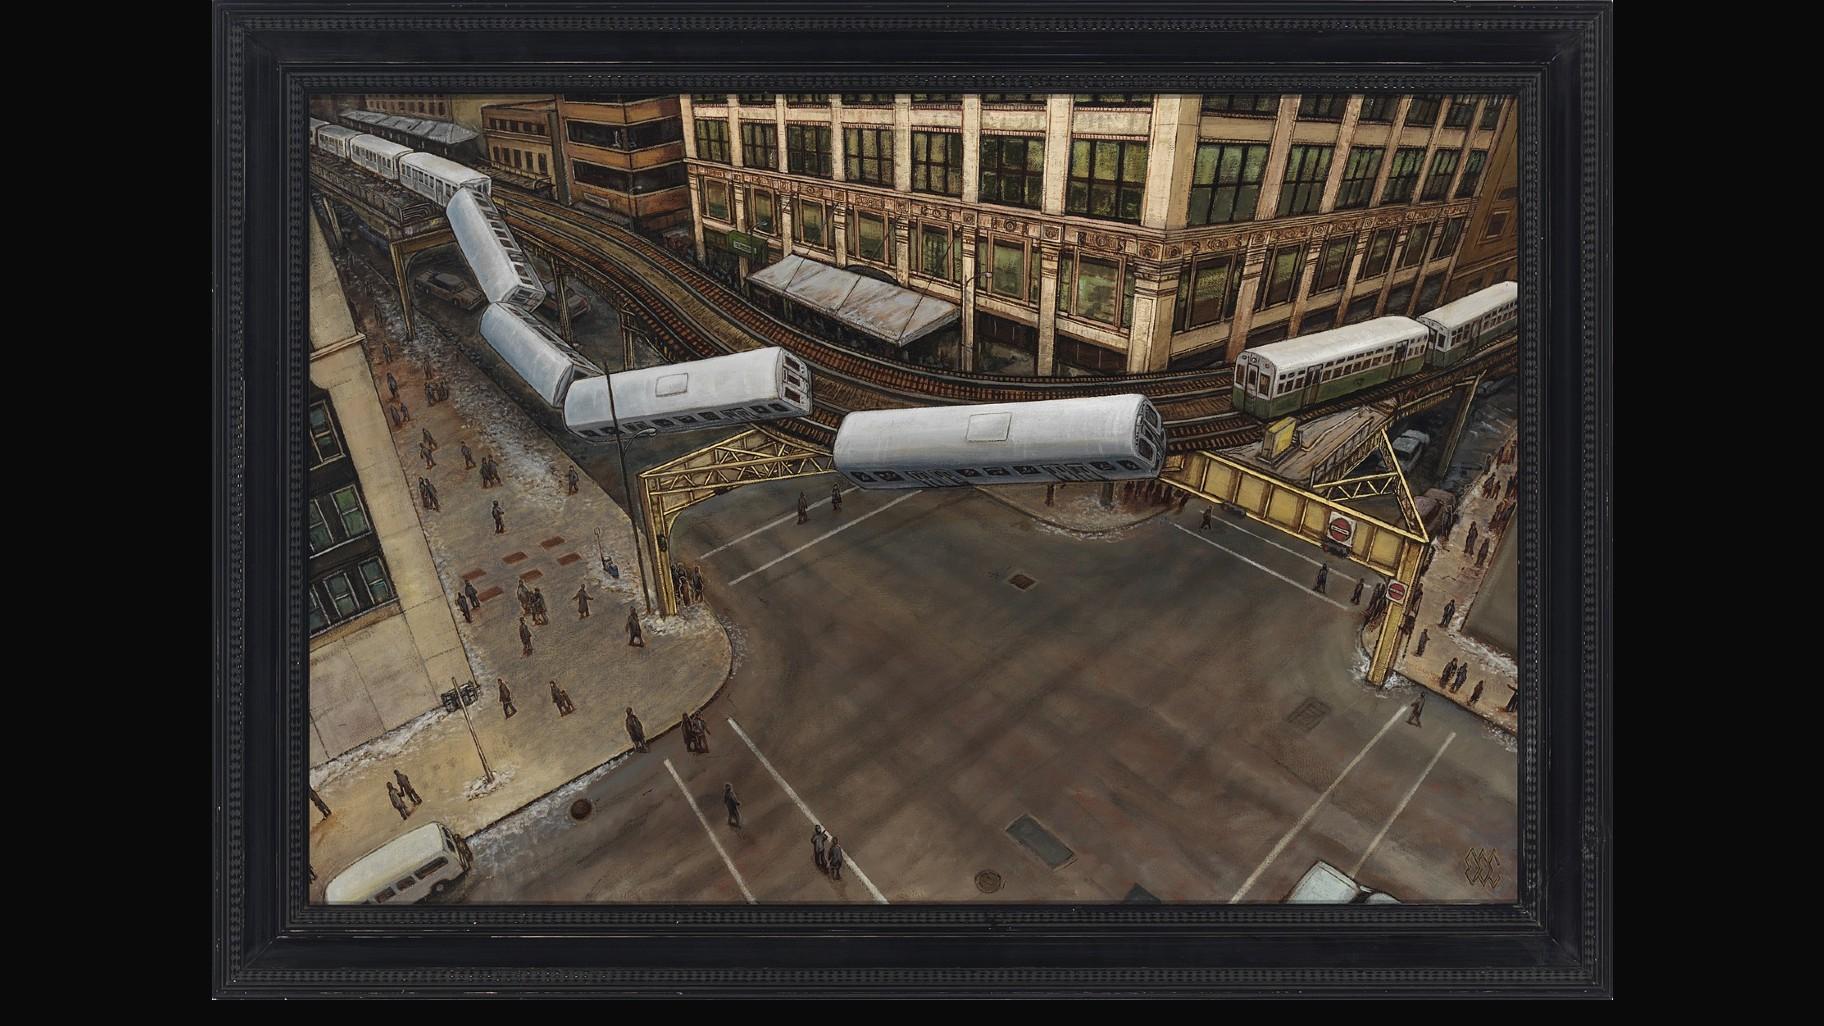 A painting of the Feb. 1977, derailment of a train during rush hour at Lake and Wabash. (Credit: Eric Edward Esper)